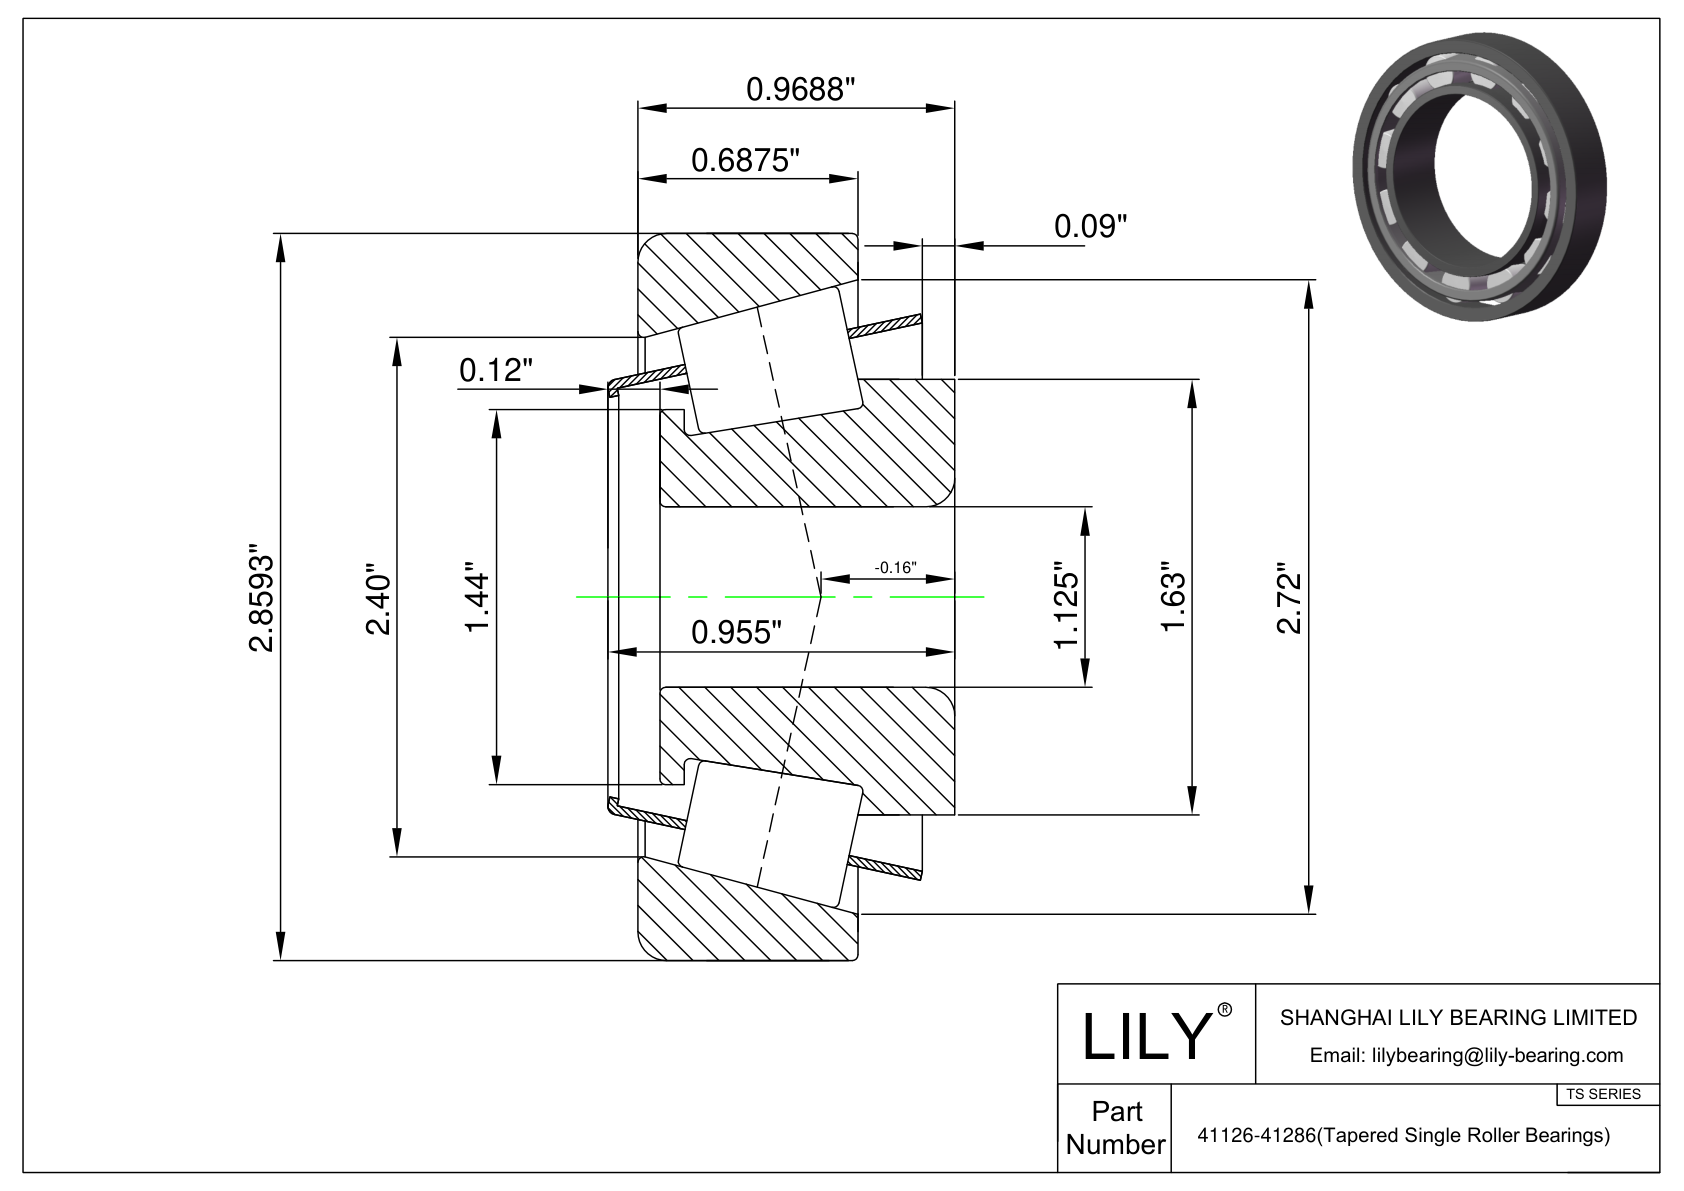 41126-41286 TS (Tapered Single Roller Bearings) (Imperial) cad drawing